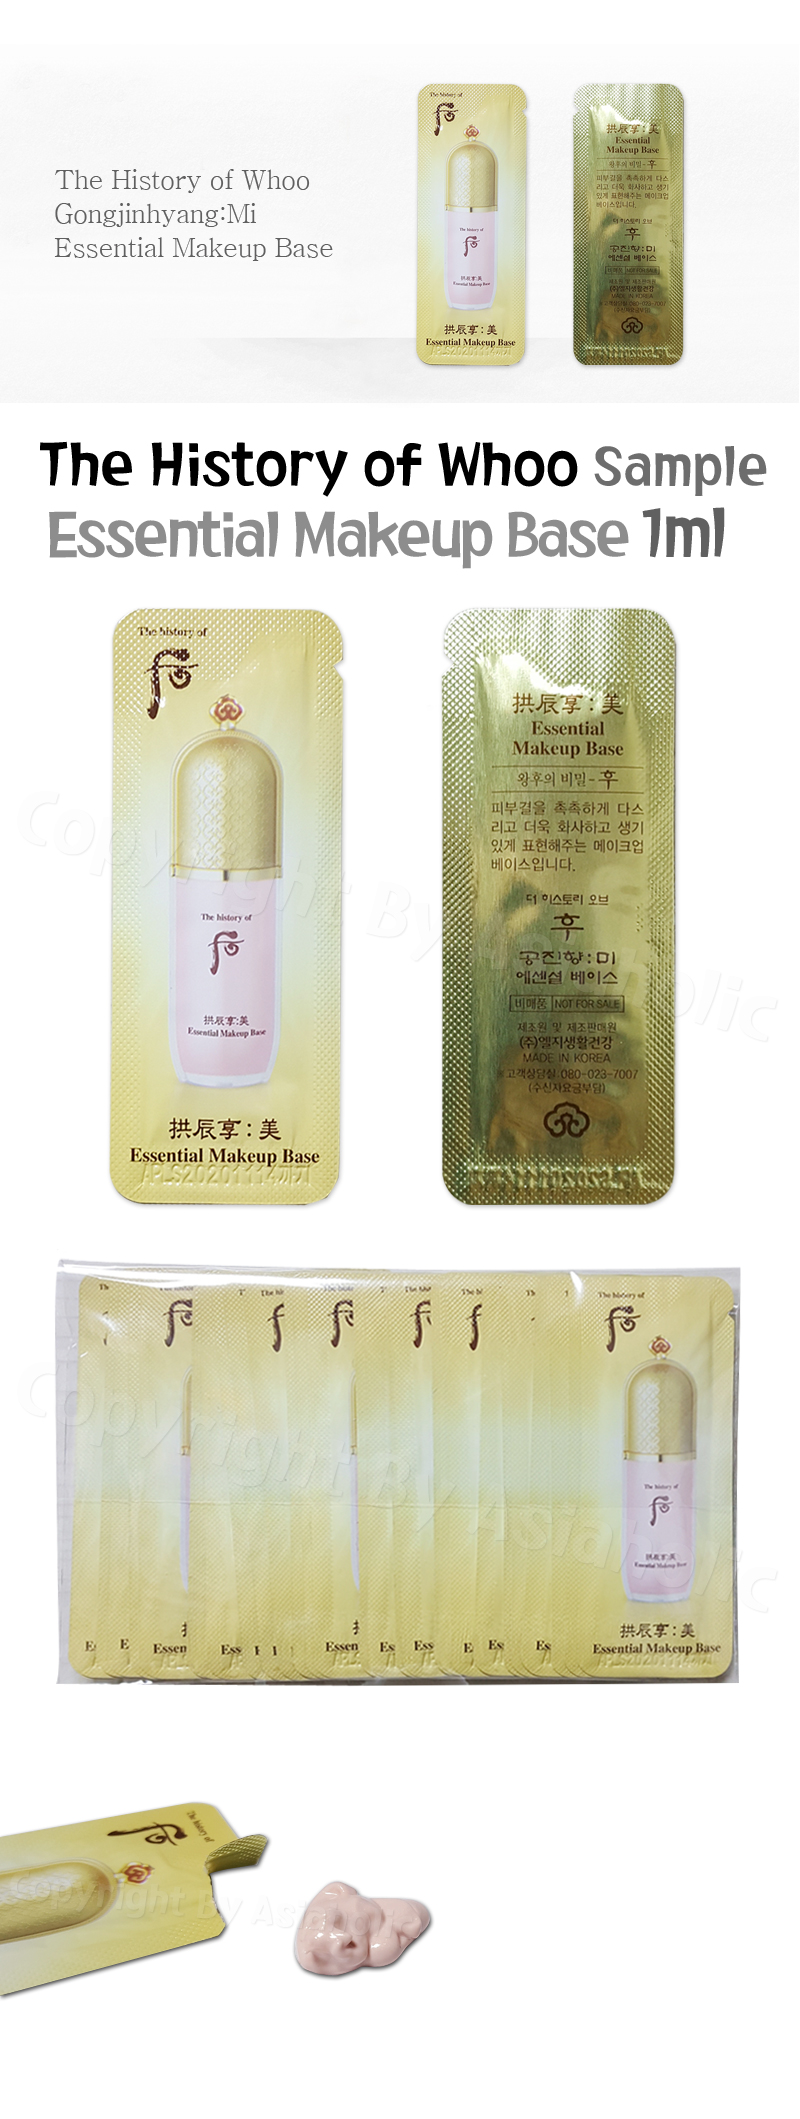 The history of Whoo Gongjinhyang Mi Essential Makeup Base 1ml x 10pcs (10ml) Newest Version